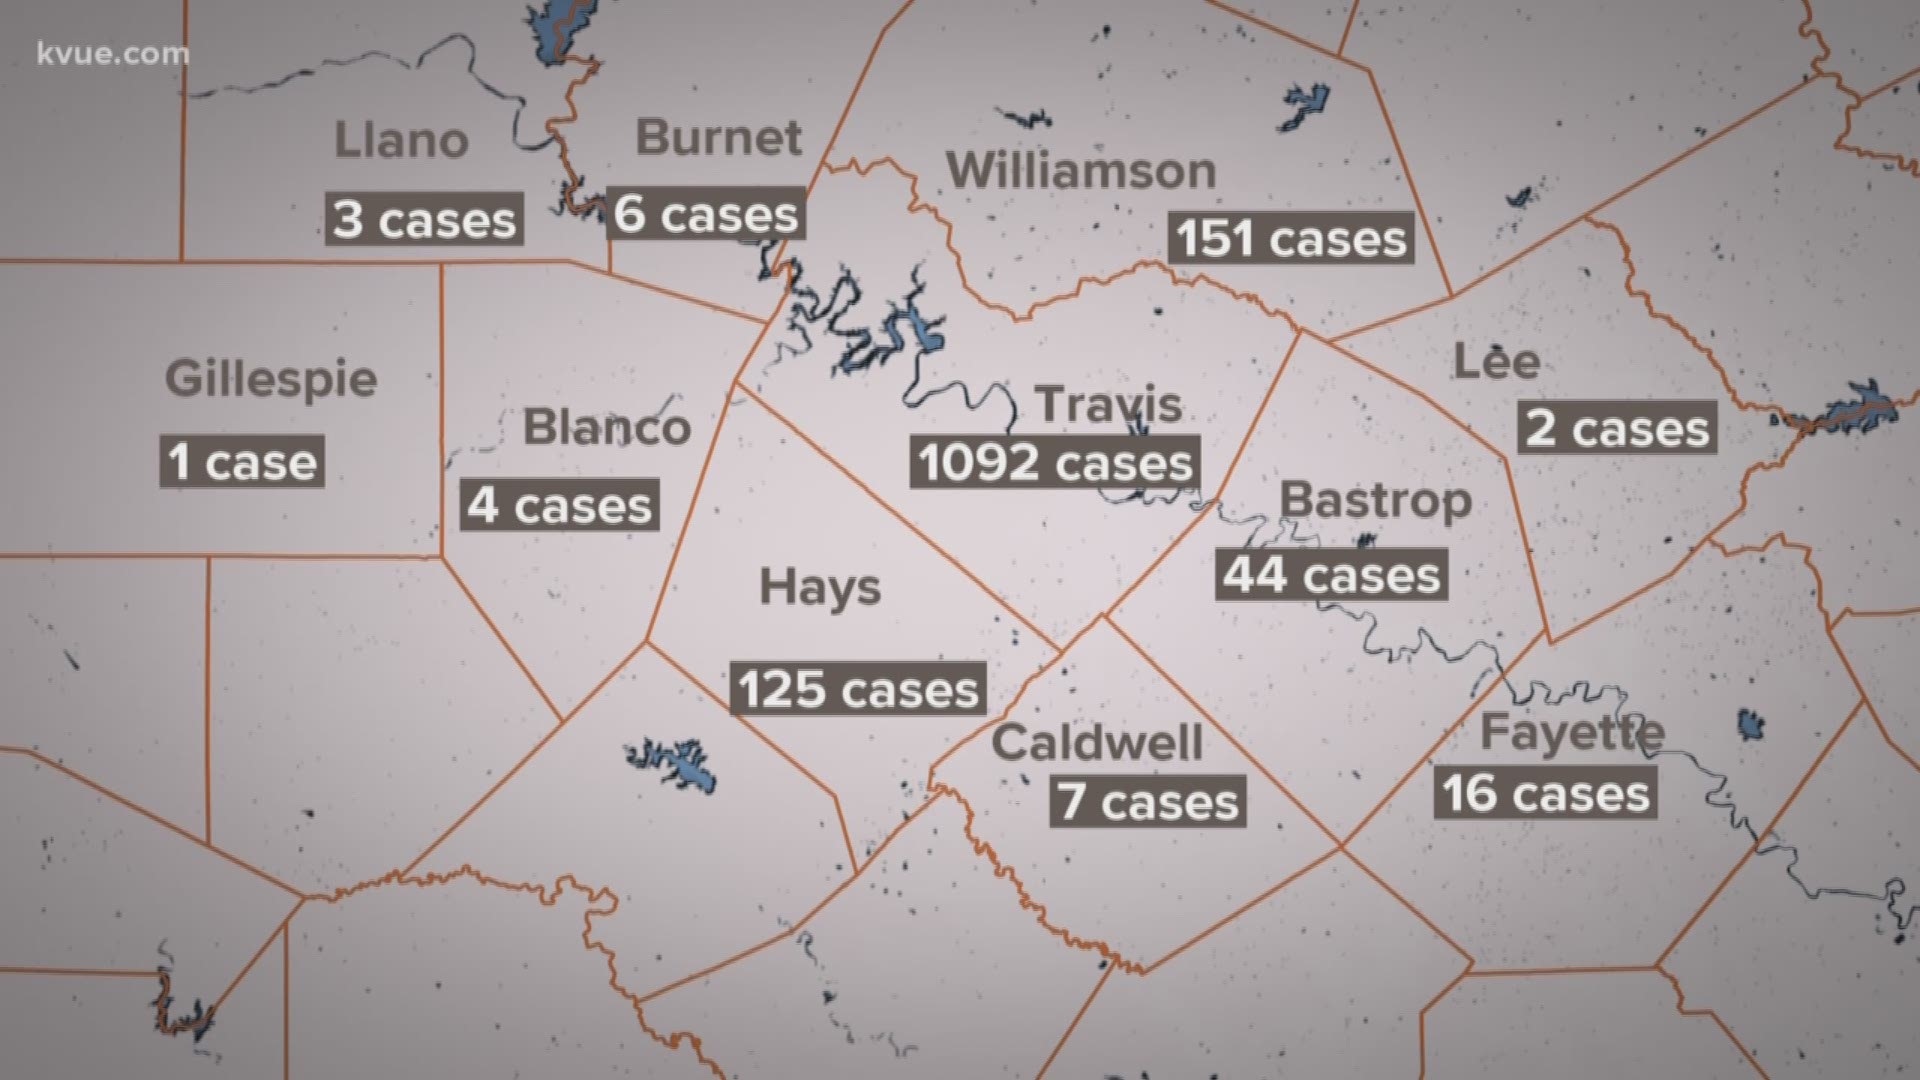 More than 18,000 people have tested positive in the state of Texas.